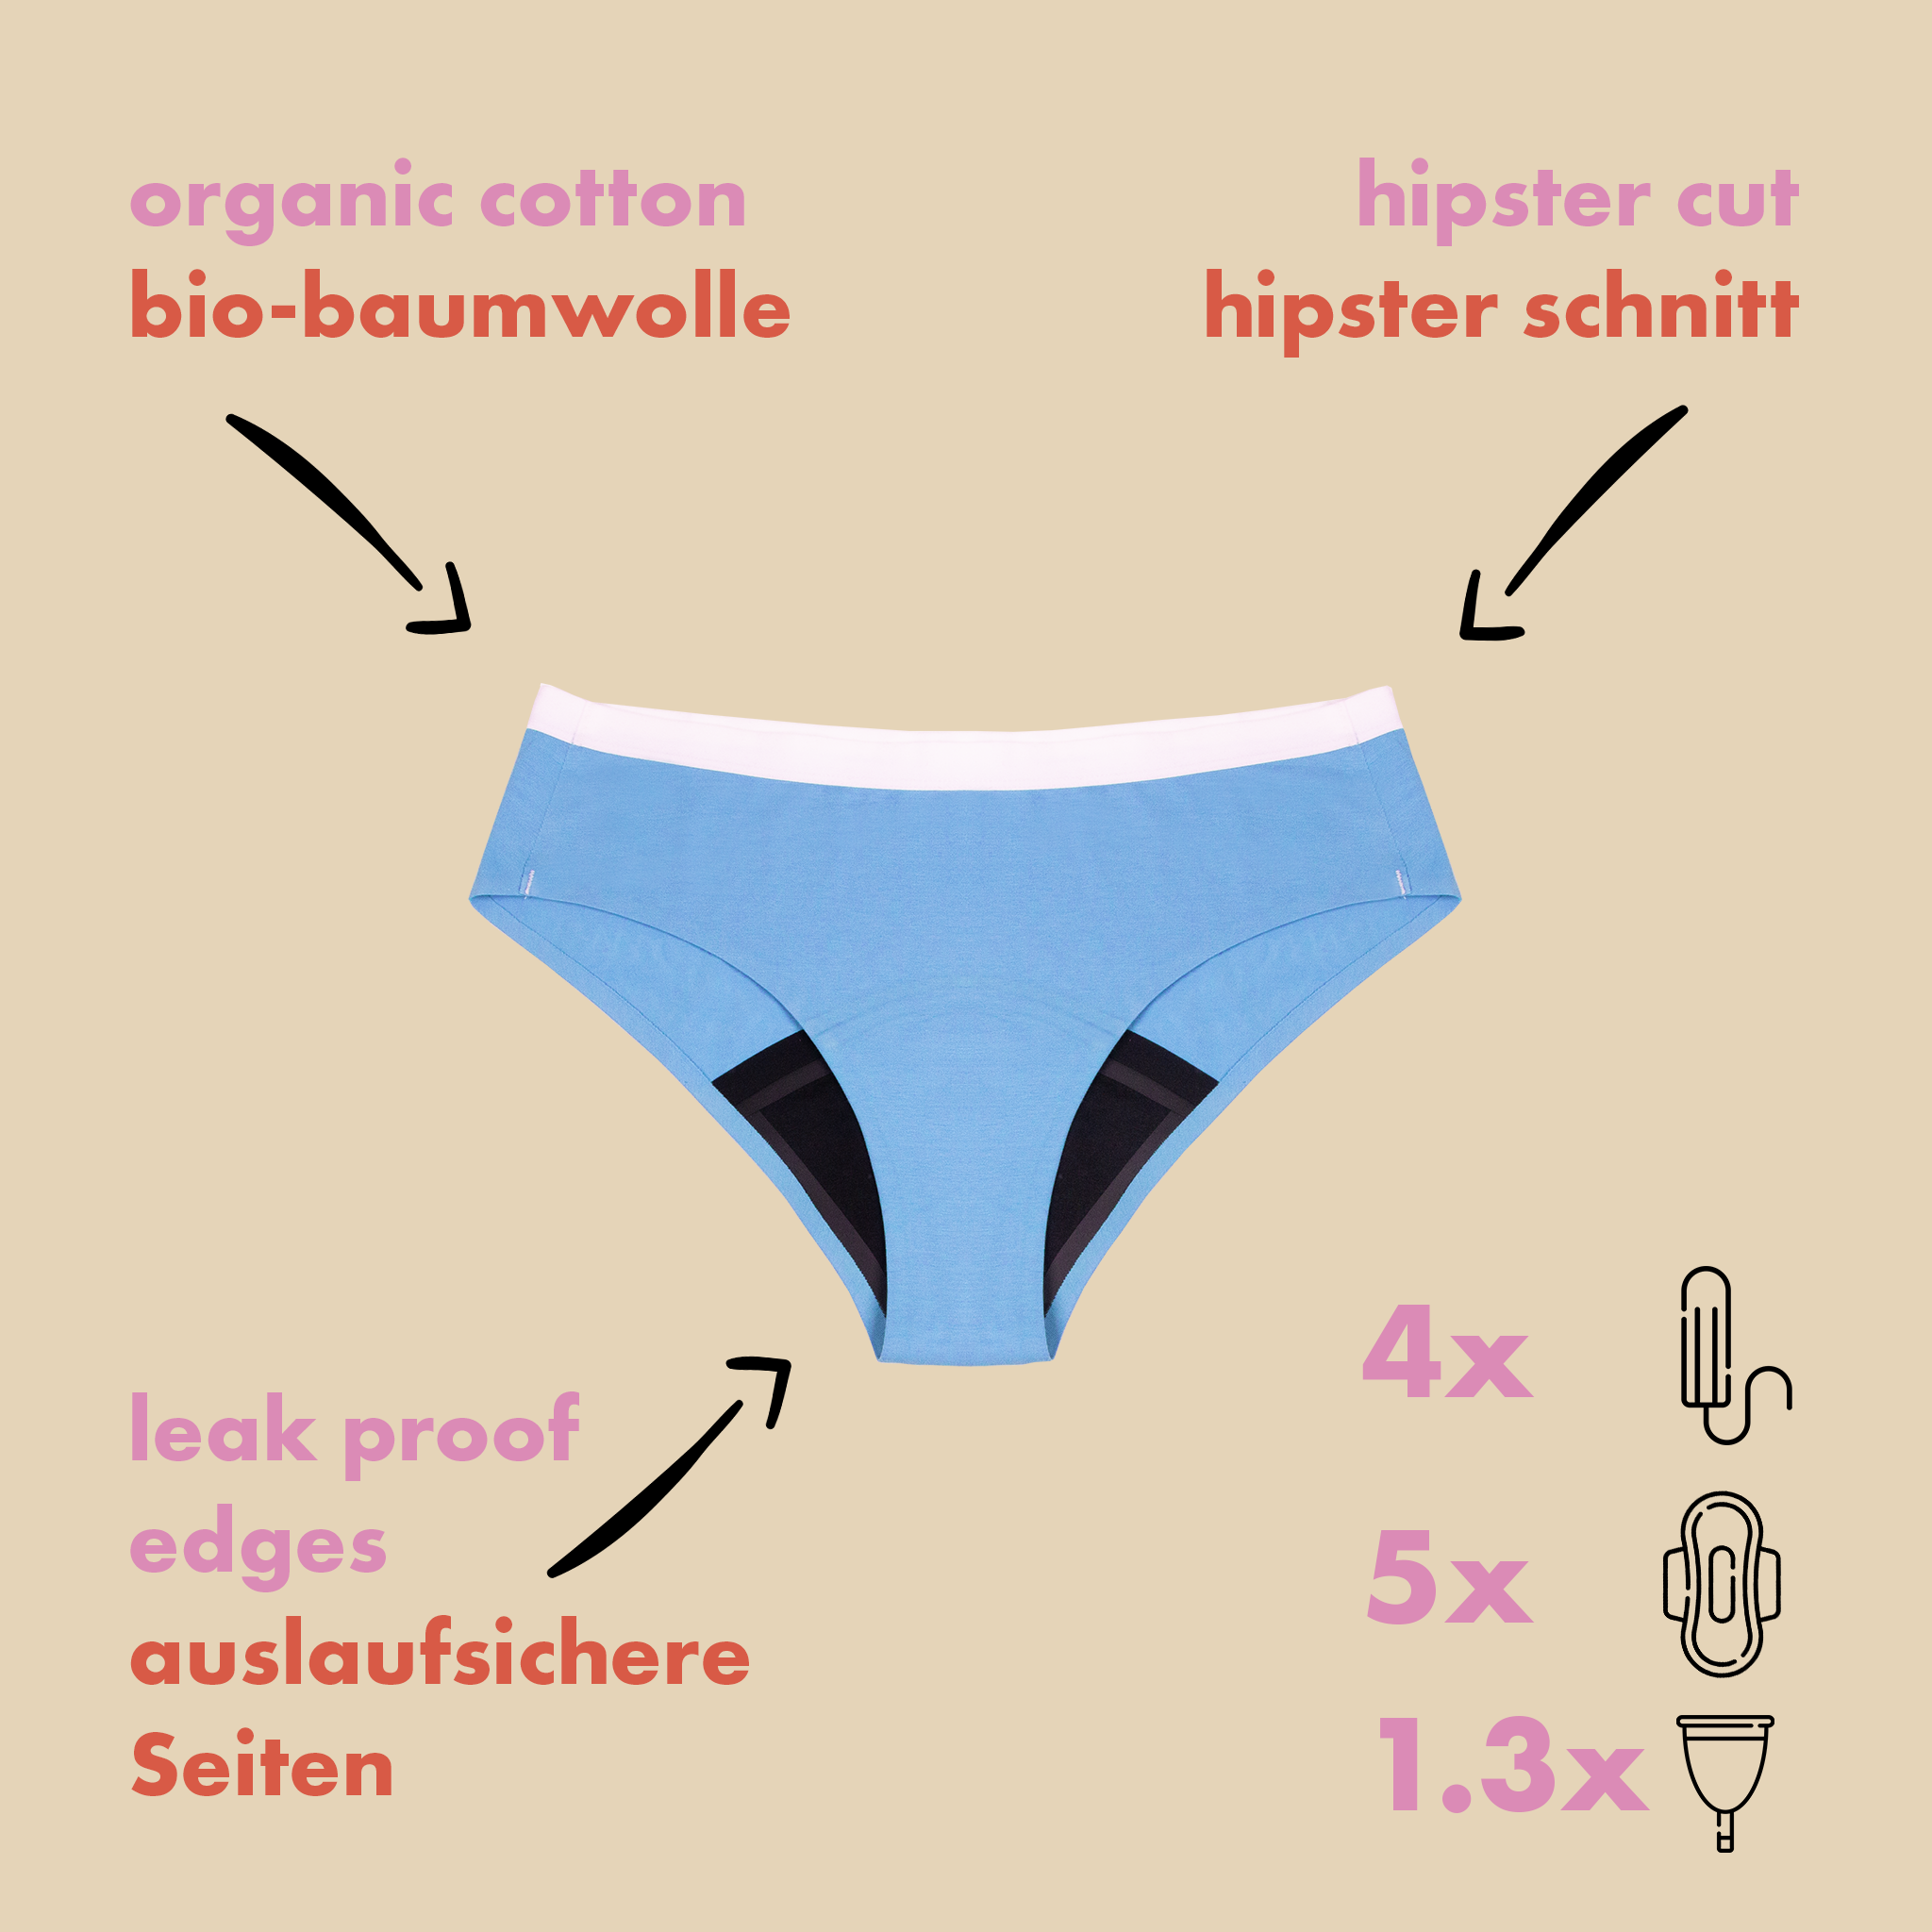 dais period underwear in hipster cut in blue with white trim designed for teens shown with product benefits organic cotton, hipster cut, leak proof edges and super absorbency of 4 tampons.